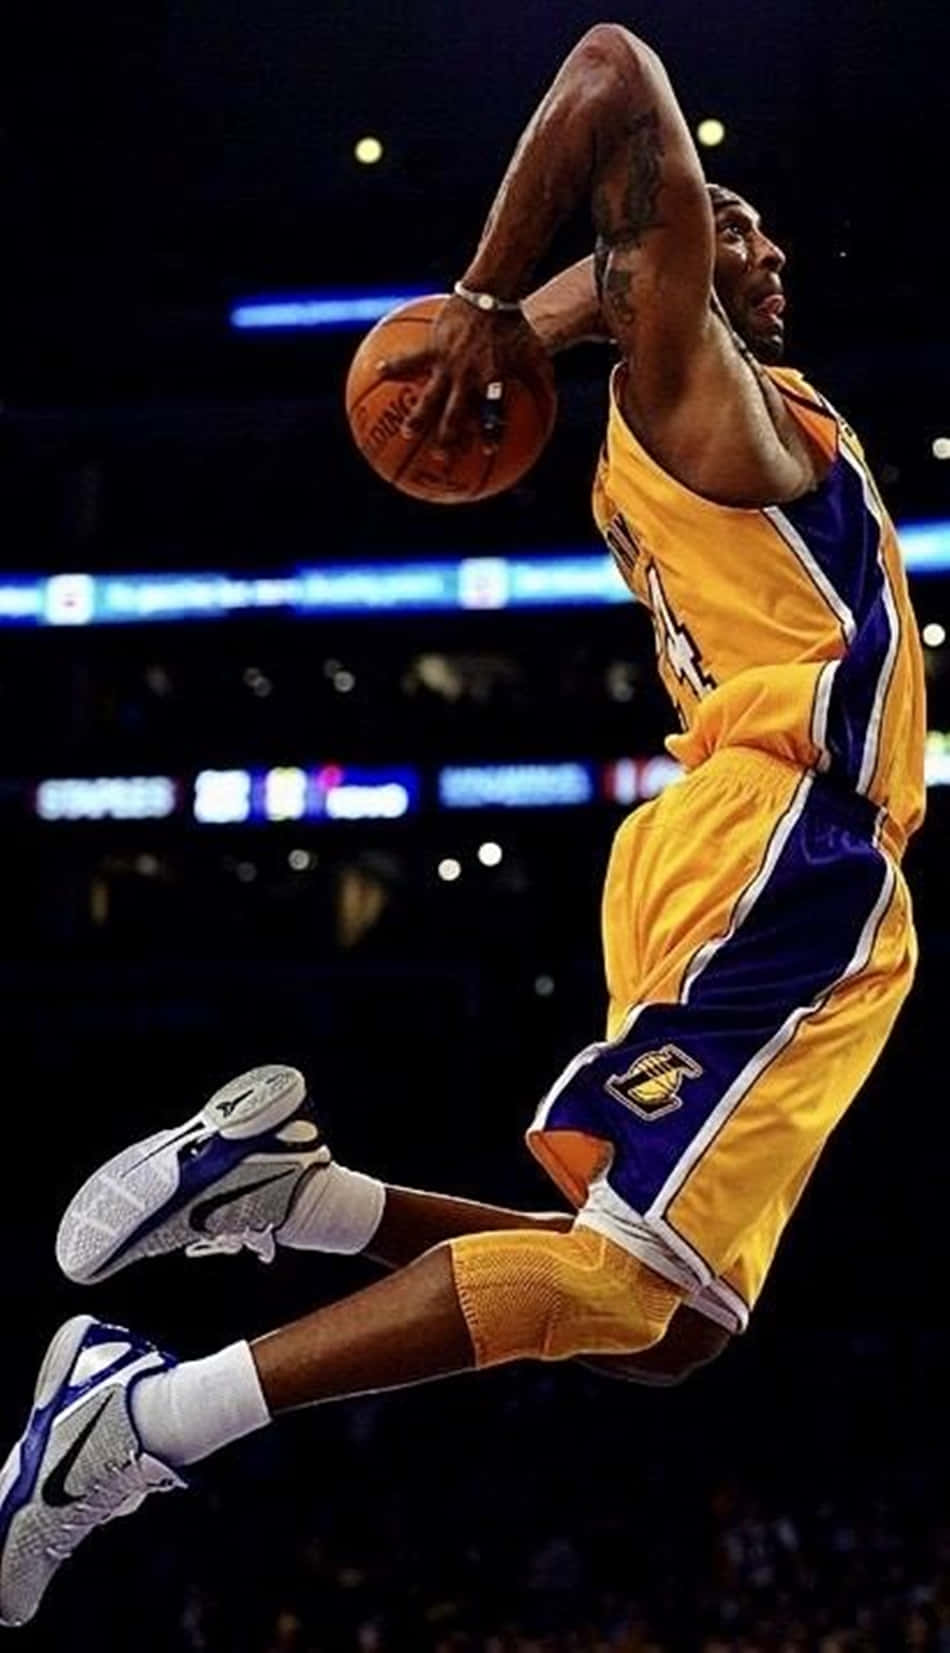 Download The legendary Kobe Bryant showing off his signature dunk